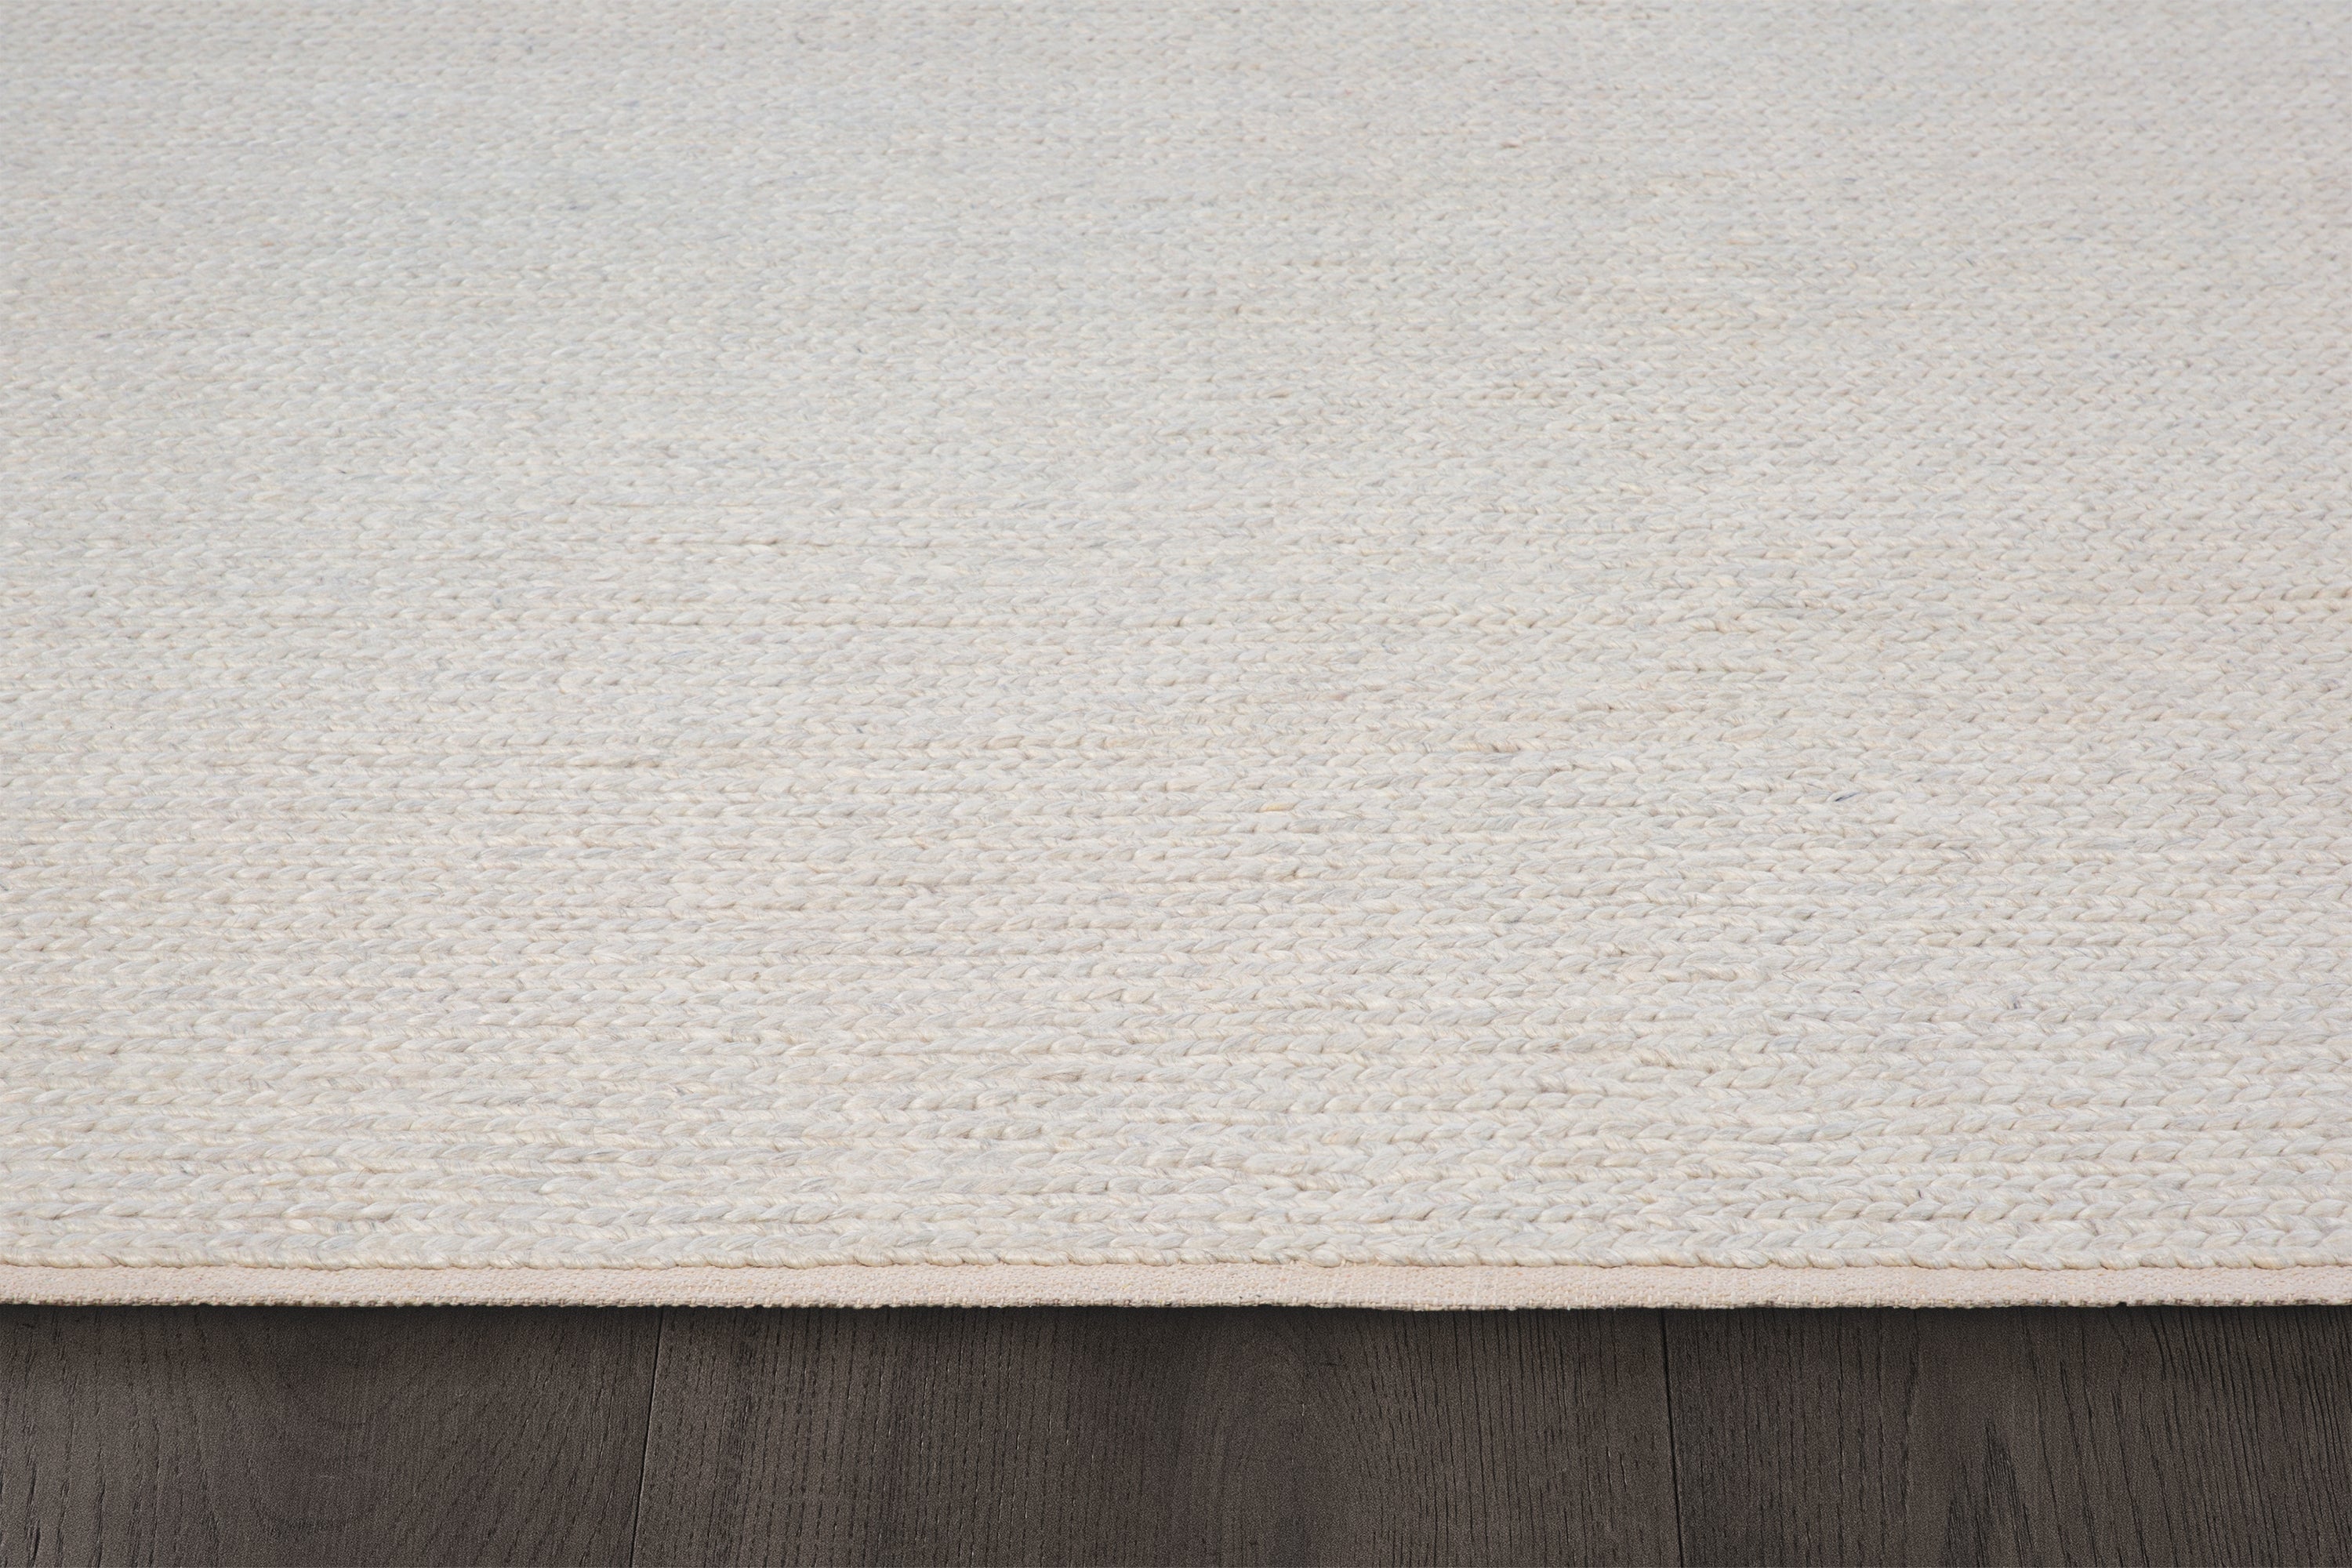 Hand Made Contemporary Modern Braided Wool Area Rug in Solid Off